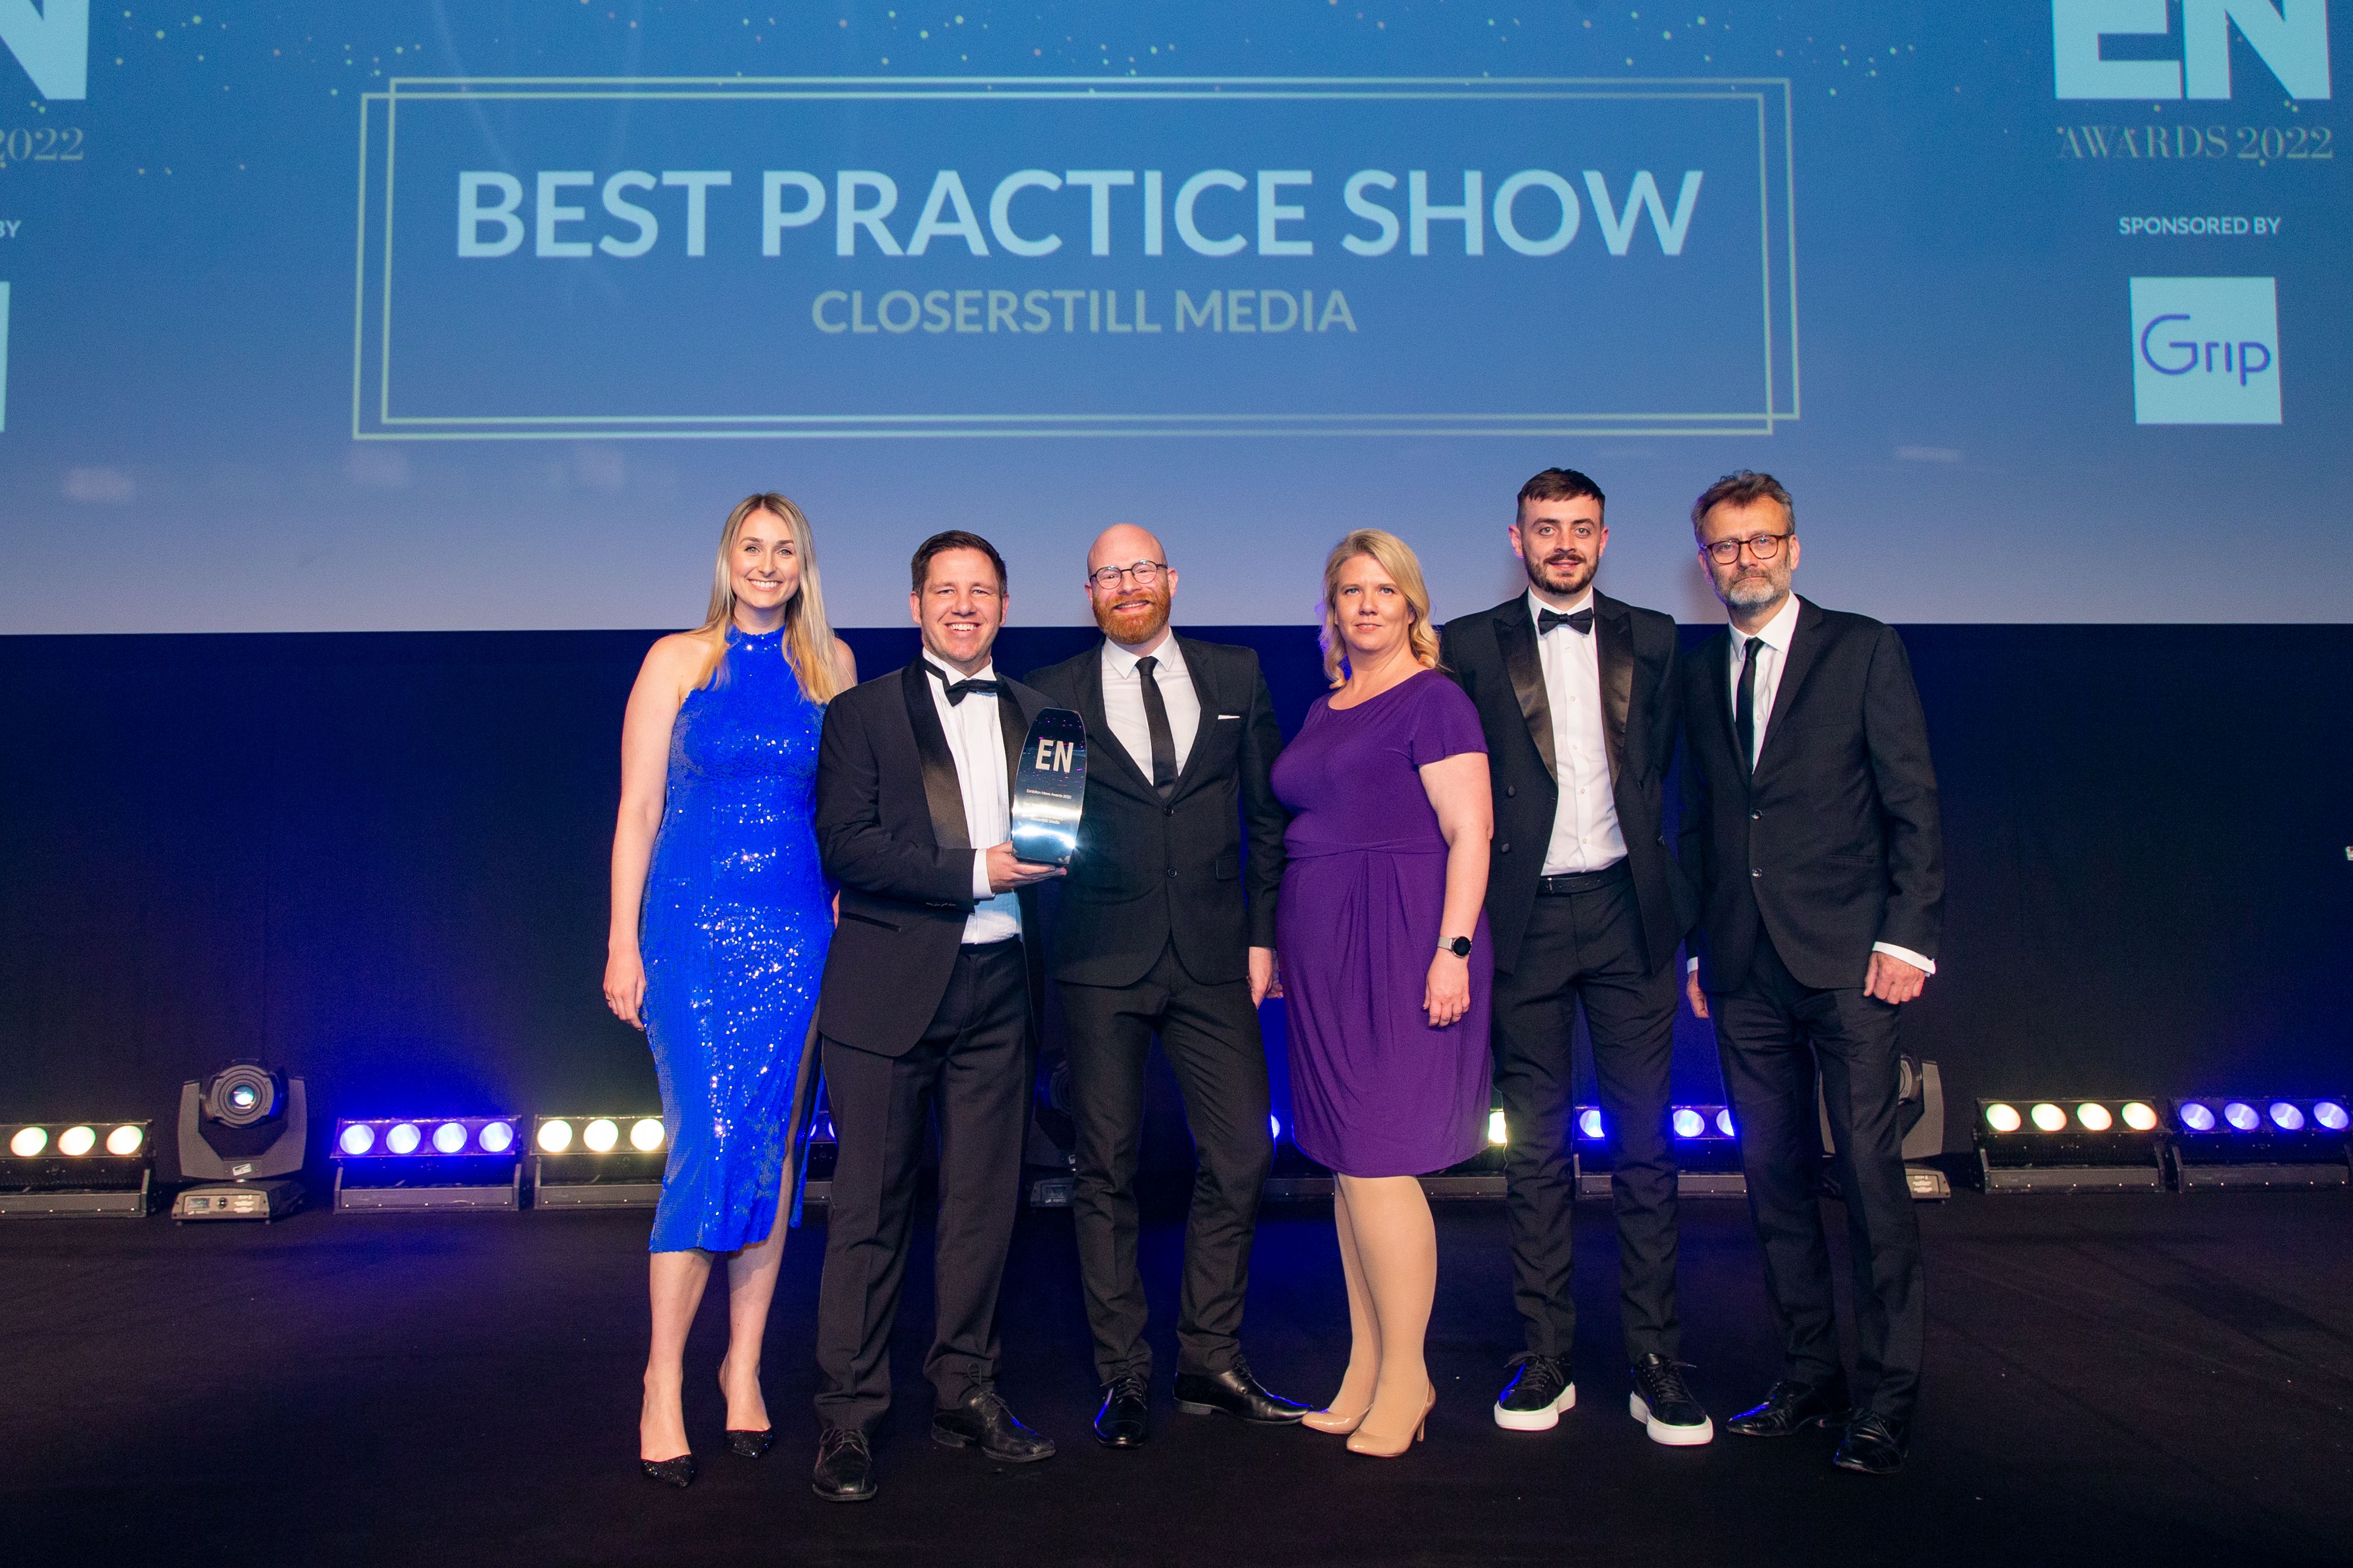 Best Practice Show Wins ‘Best Trade Show Under 2000m’ at the 2022 Exhibition News Awards